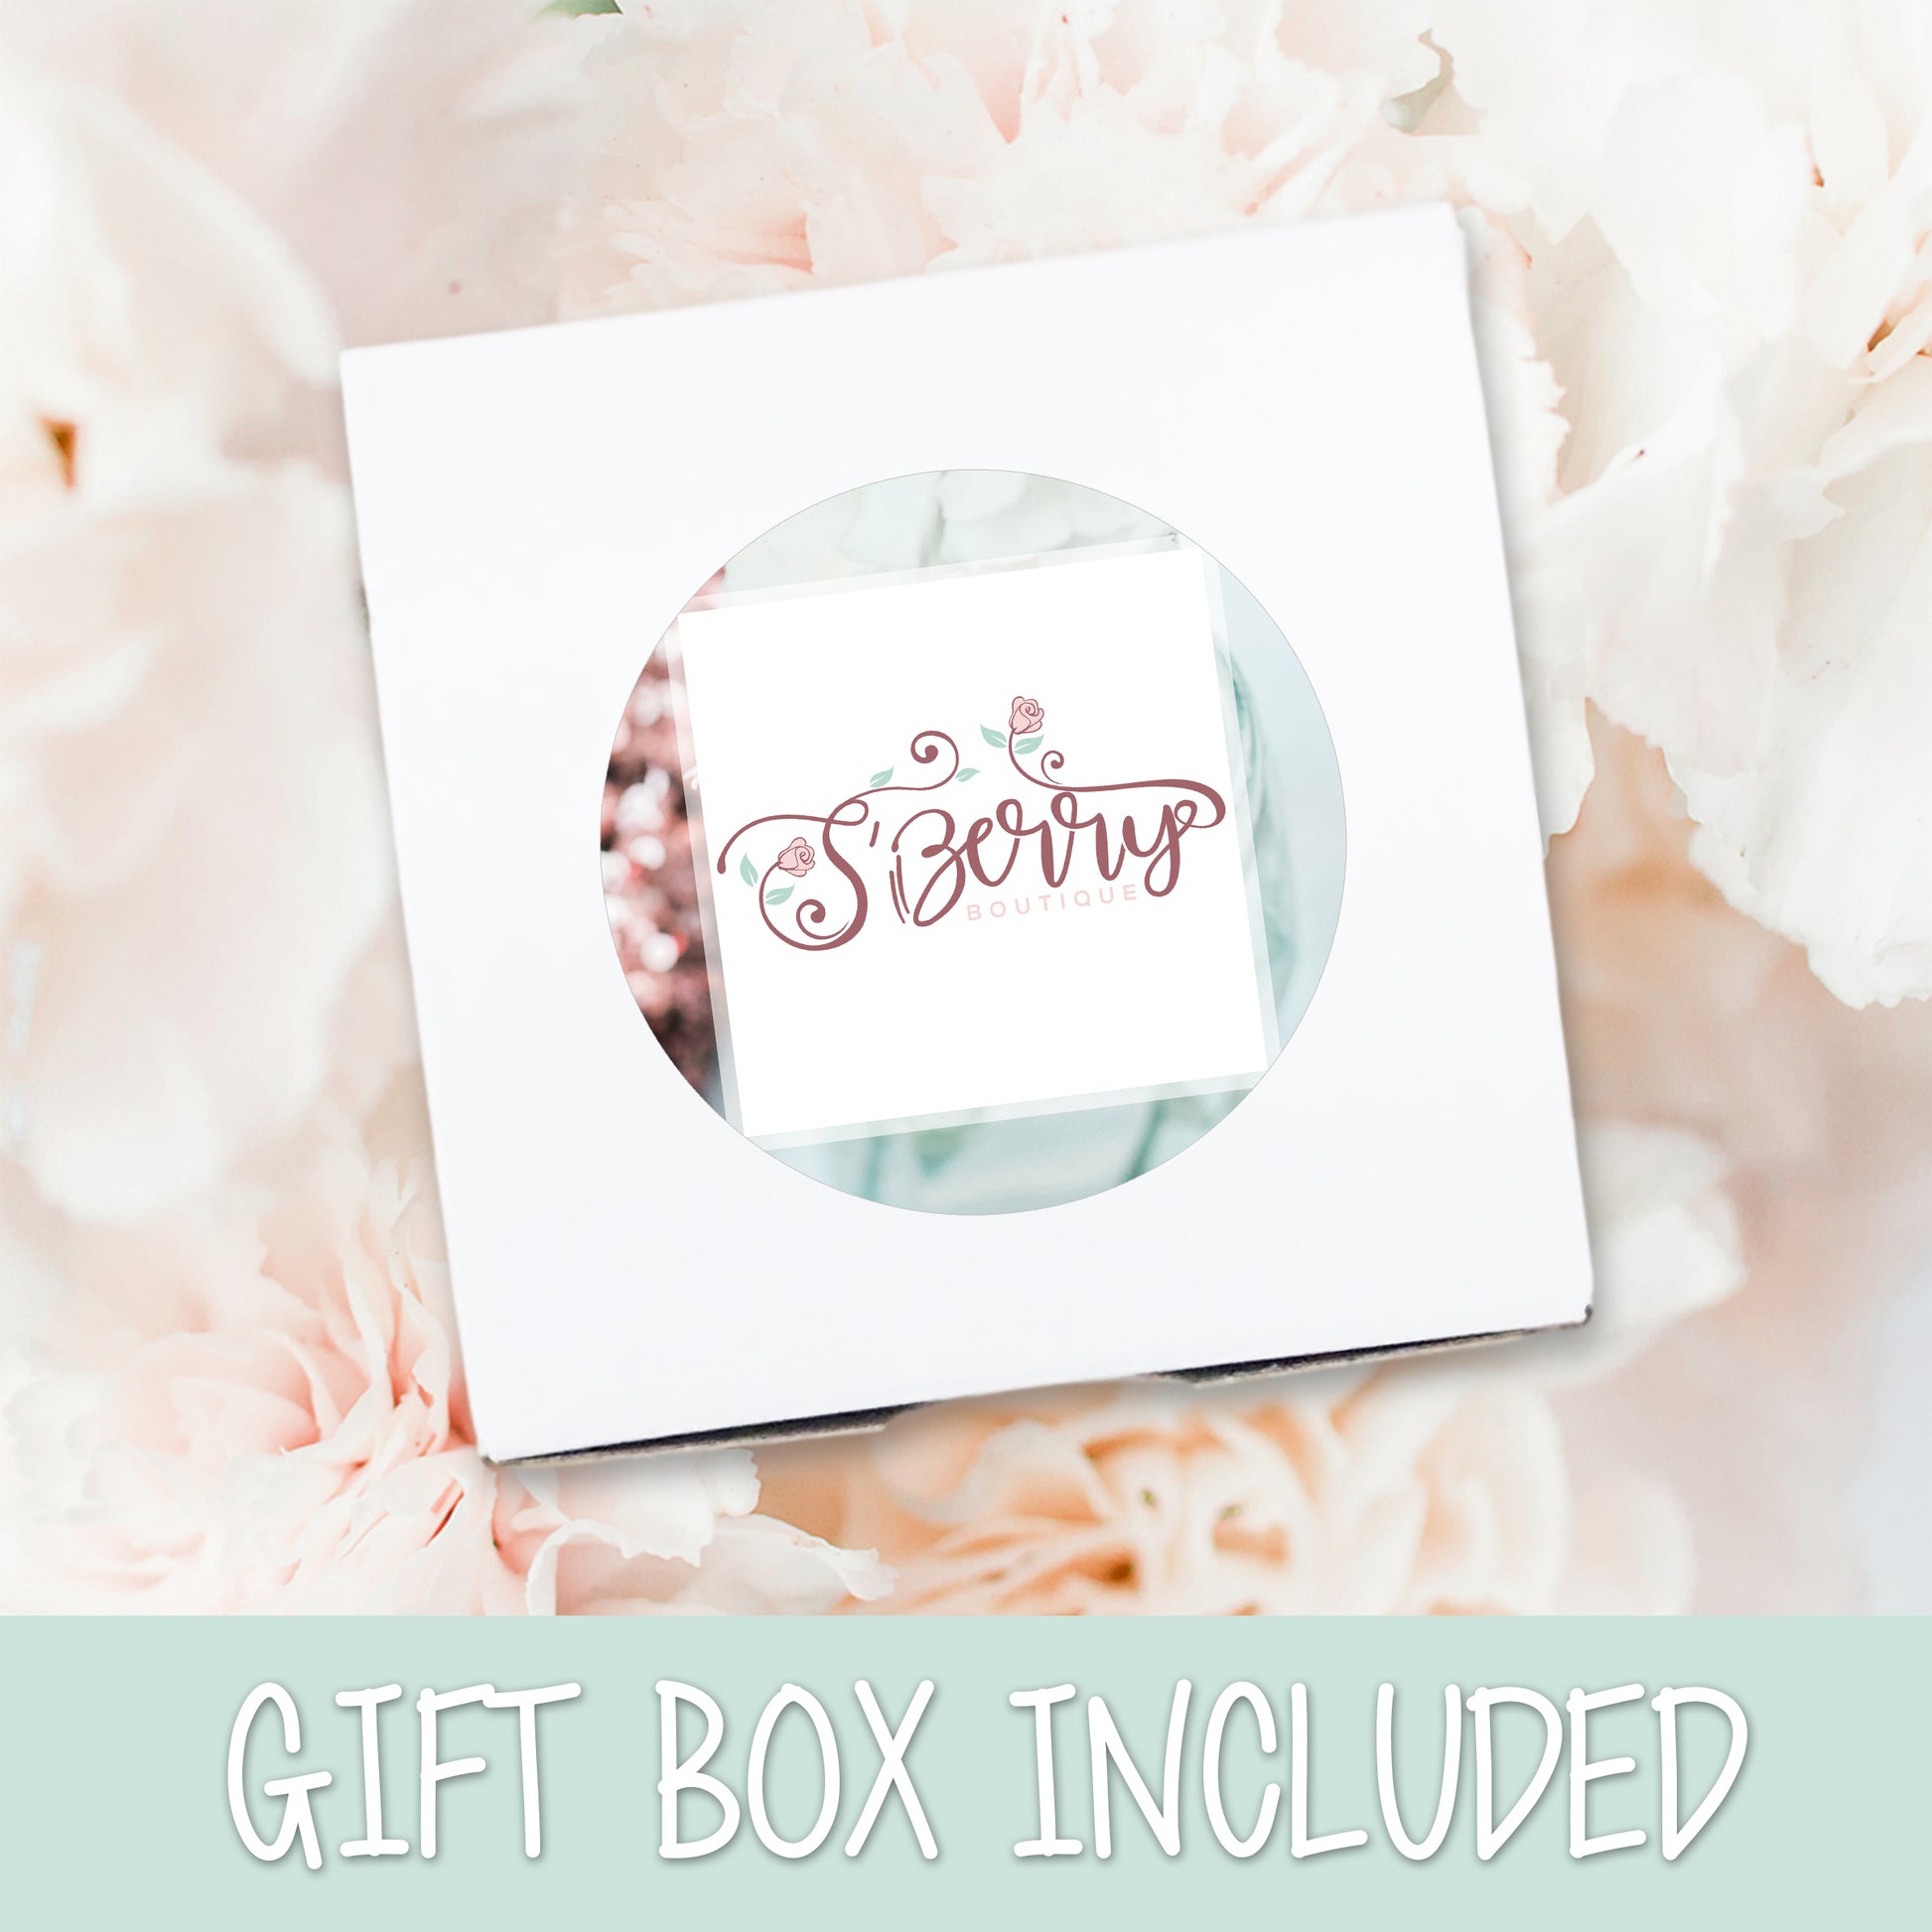 Personalized Floral Tote Bag, Cosmetic Bag & Compact Mirror Gift Set - GS0002 | S'Berry Boutique